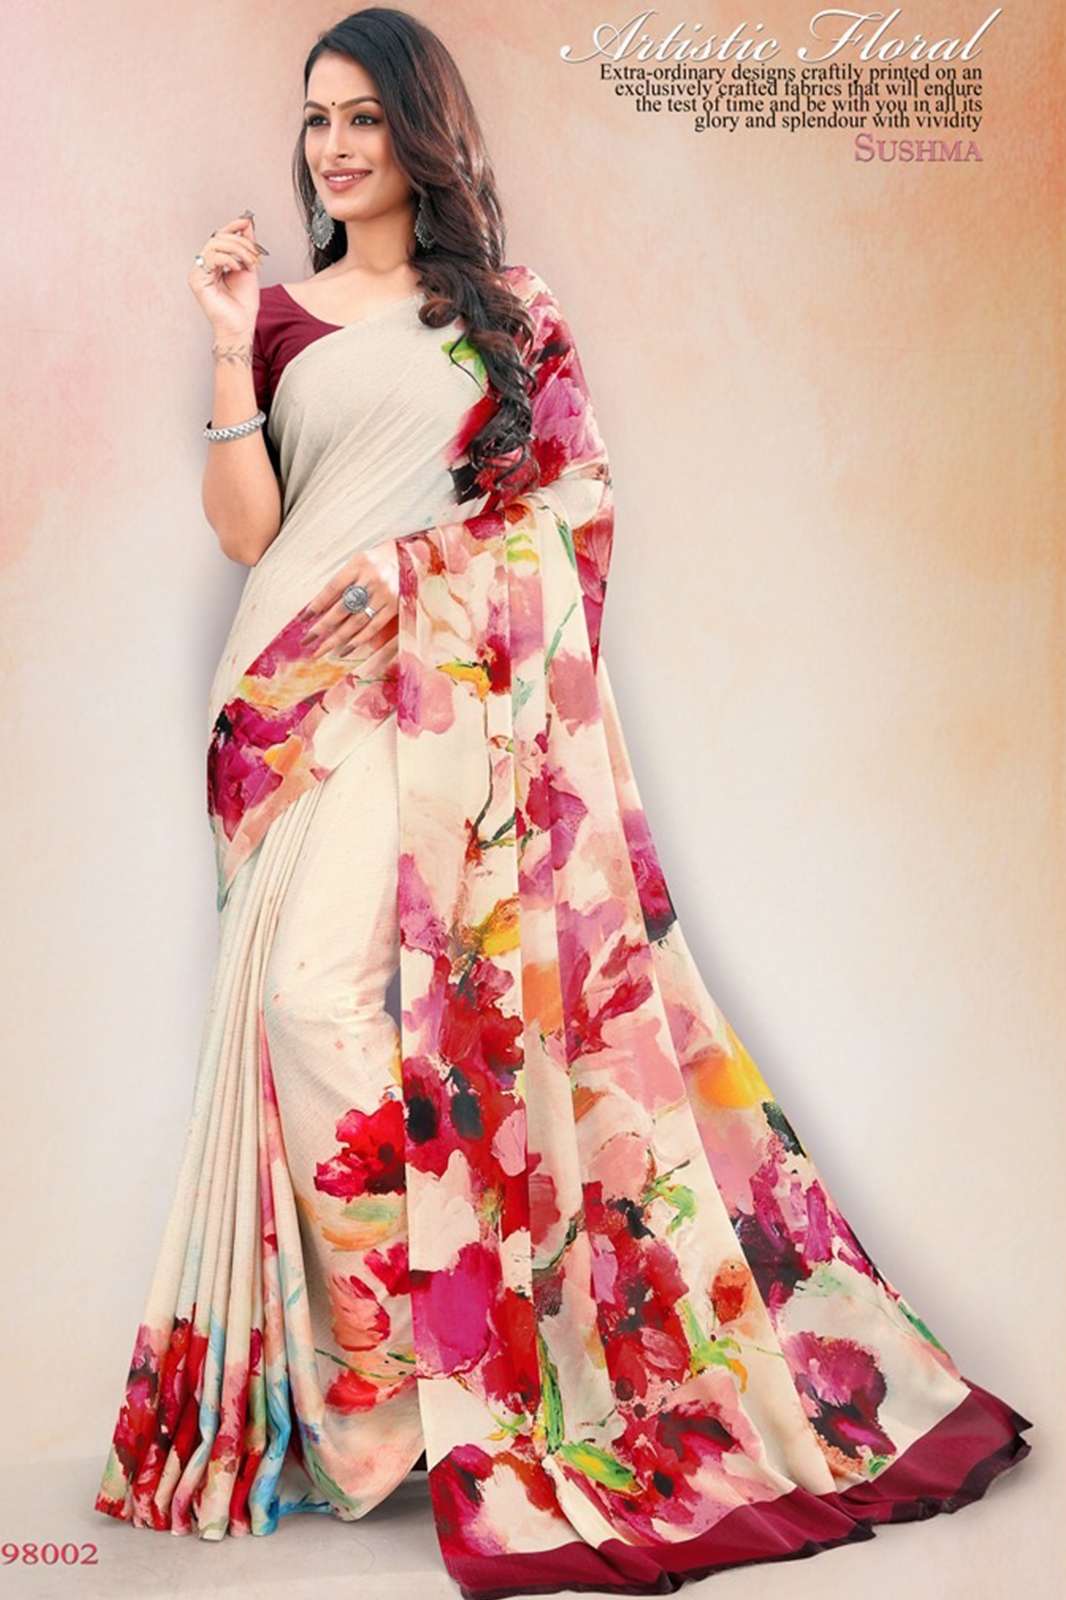 SUSHMA CLASSY DIGITAL VOL-32 new prints with varied colour hues and patterns saree 